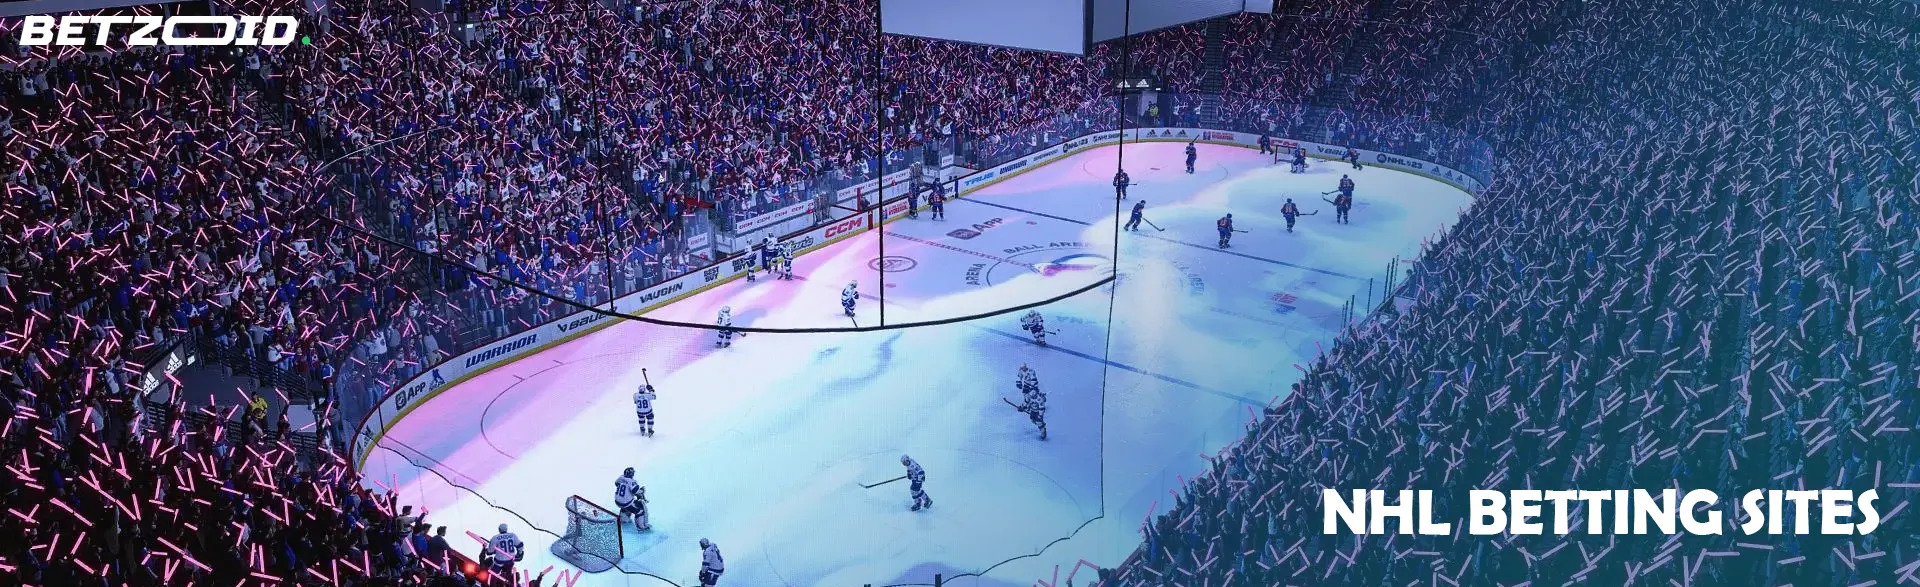 NHL gambling sites in Canada feature vibrant scenes like this crowded stadium with fans holding glowing sticks during a game.